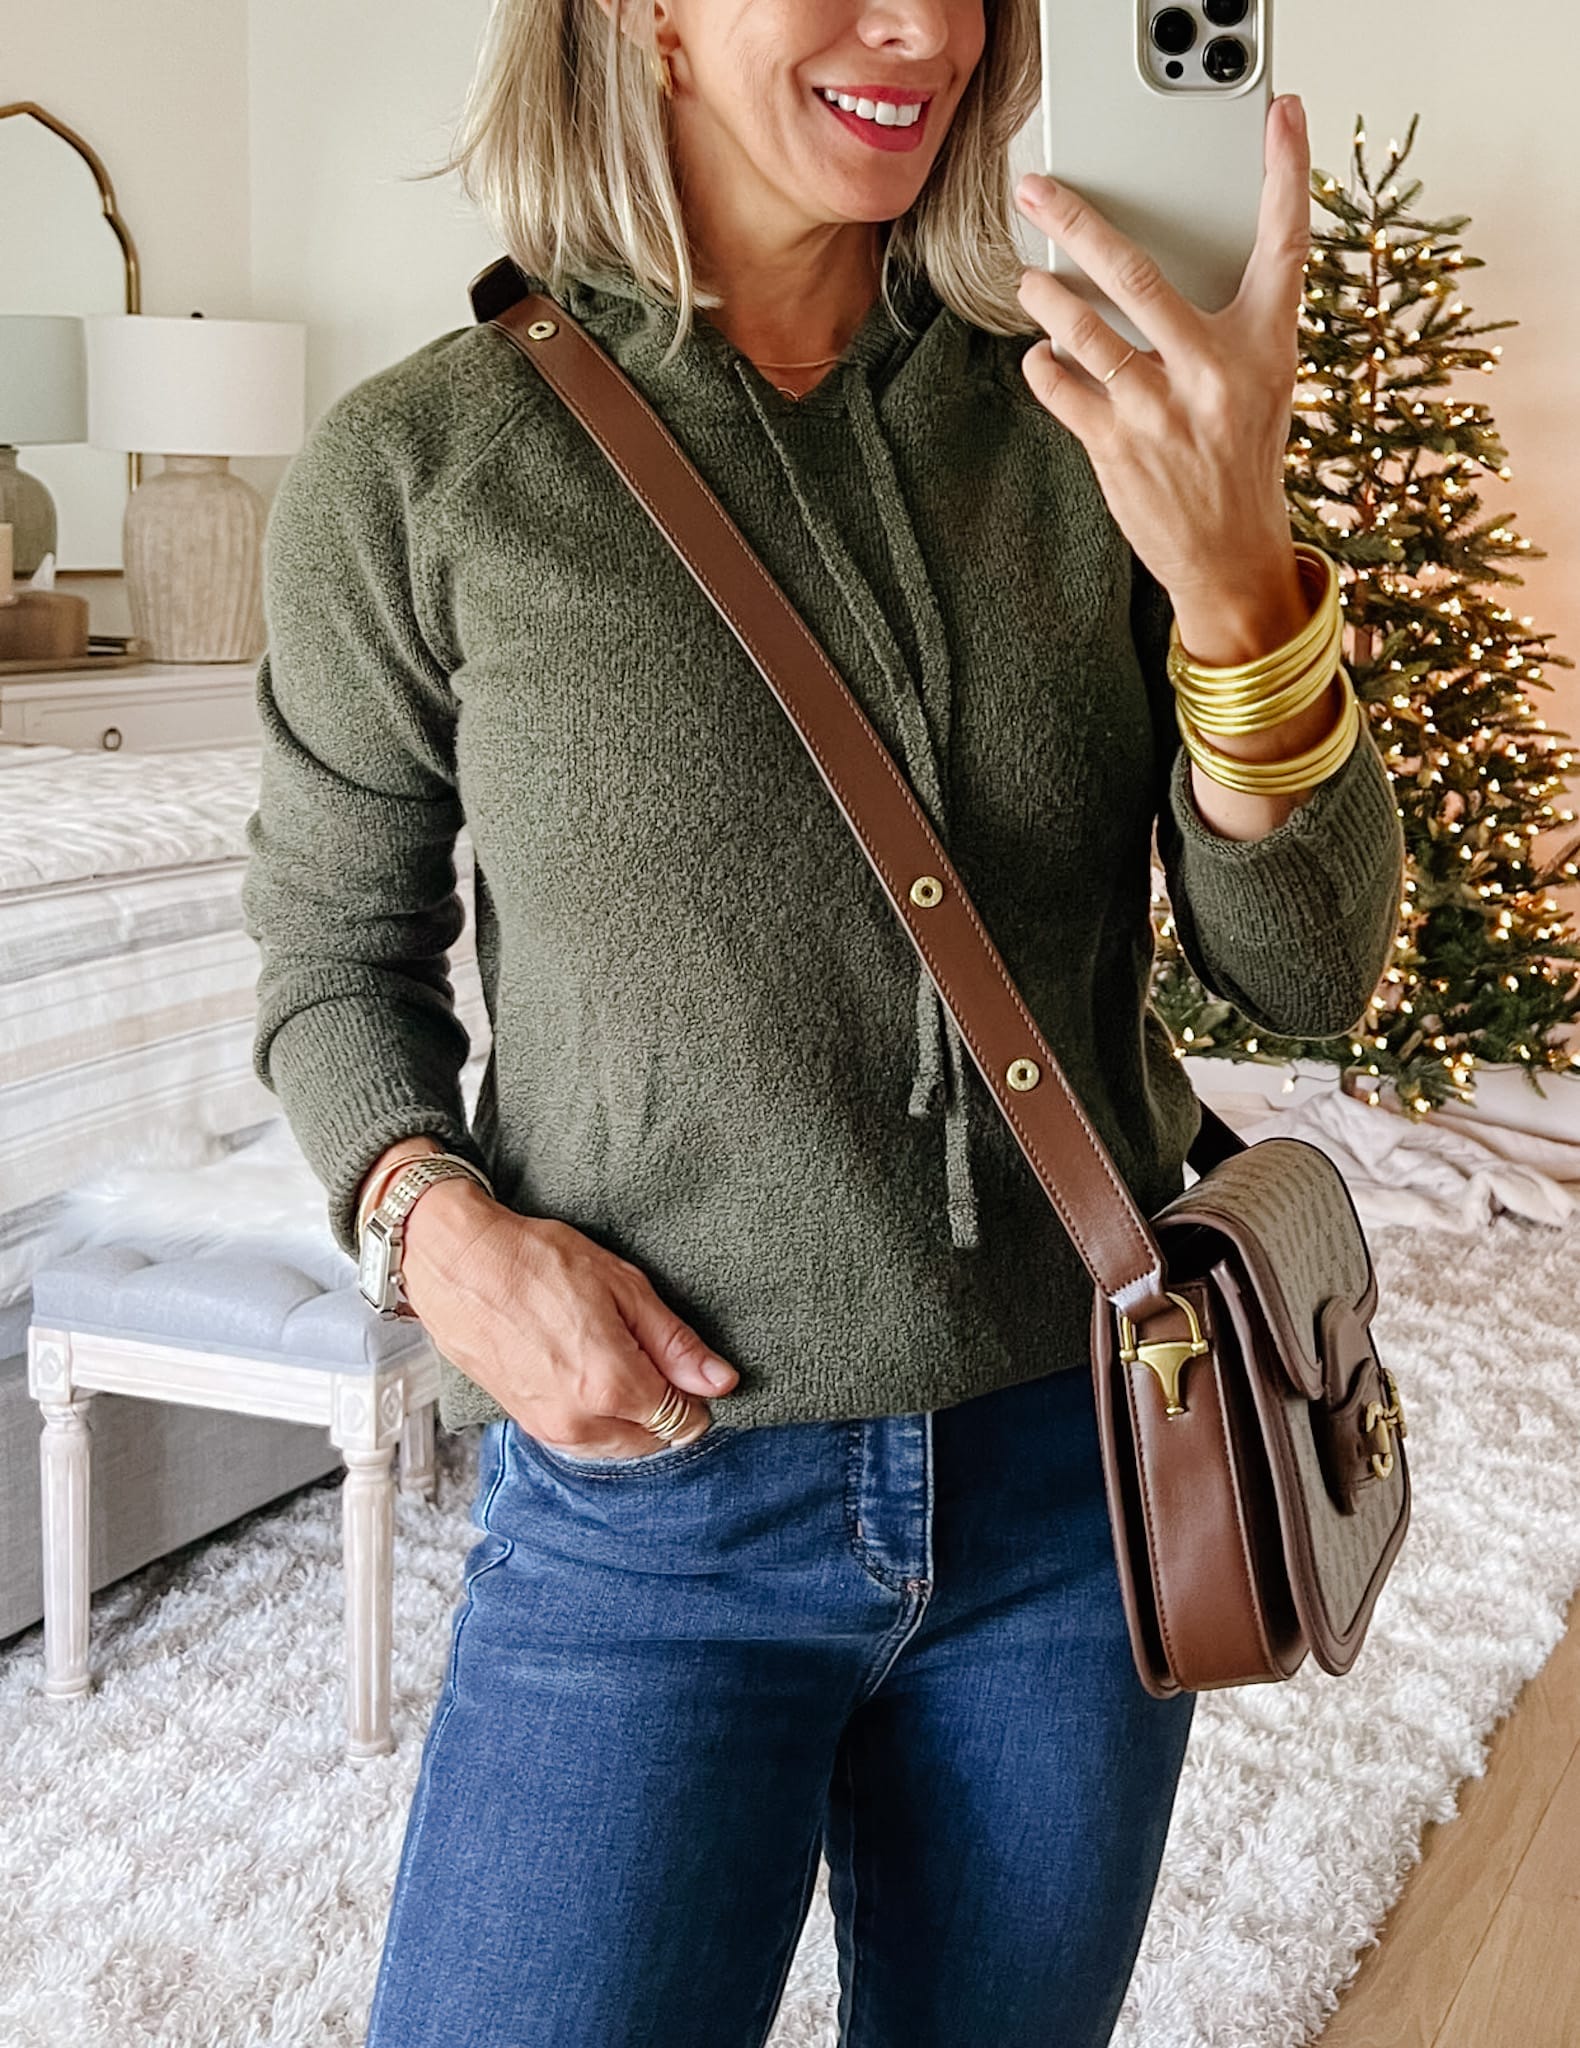 Olive Green Pullover, Jeans, Booties 